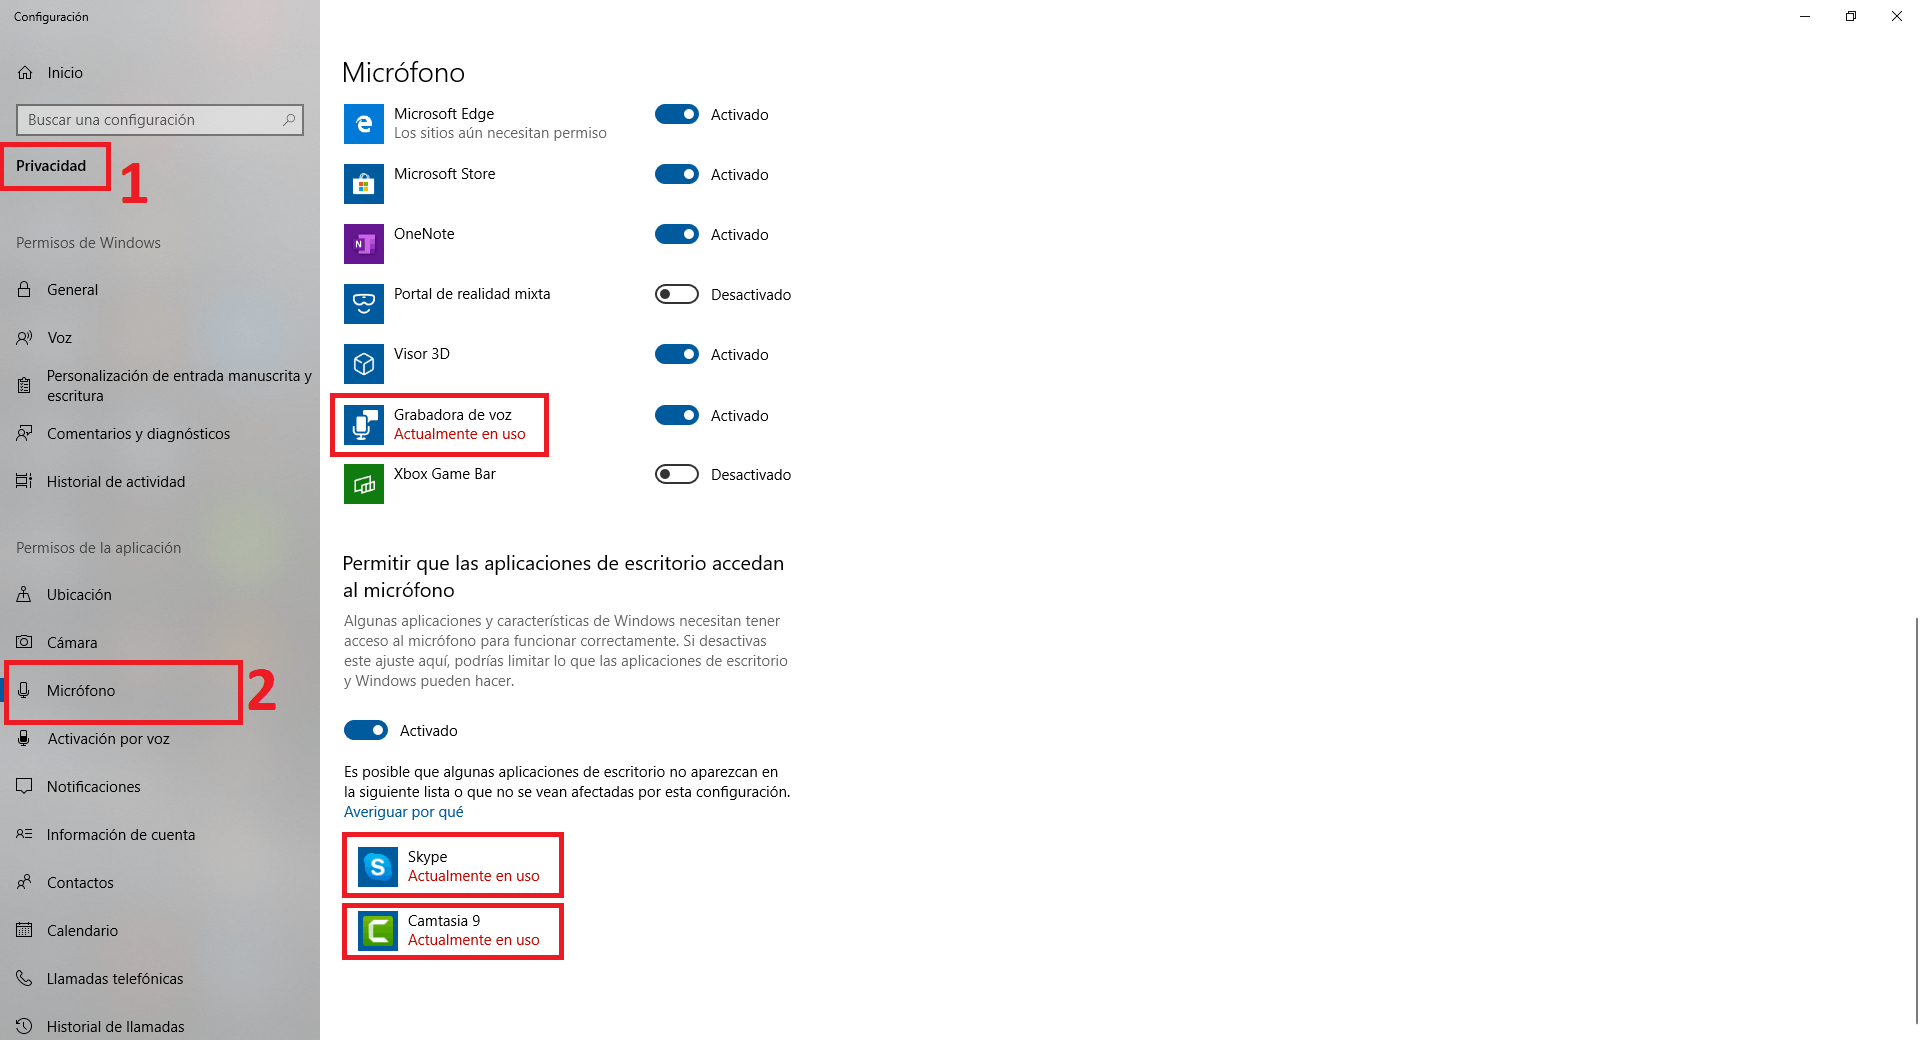 which apps or programs can access the microphone of your Windows 10 computer